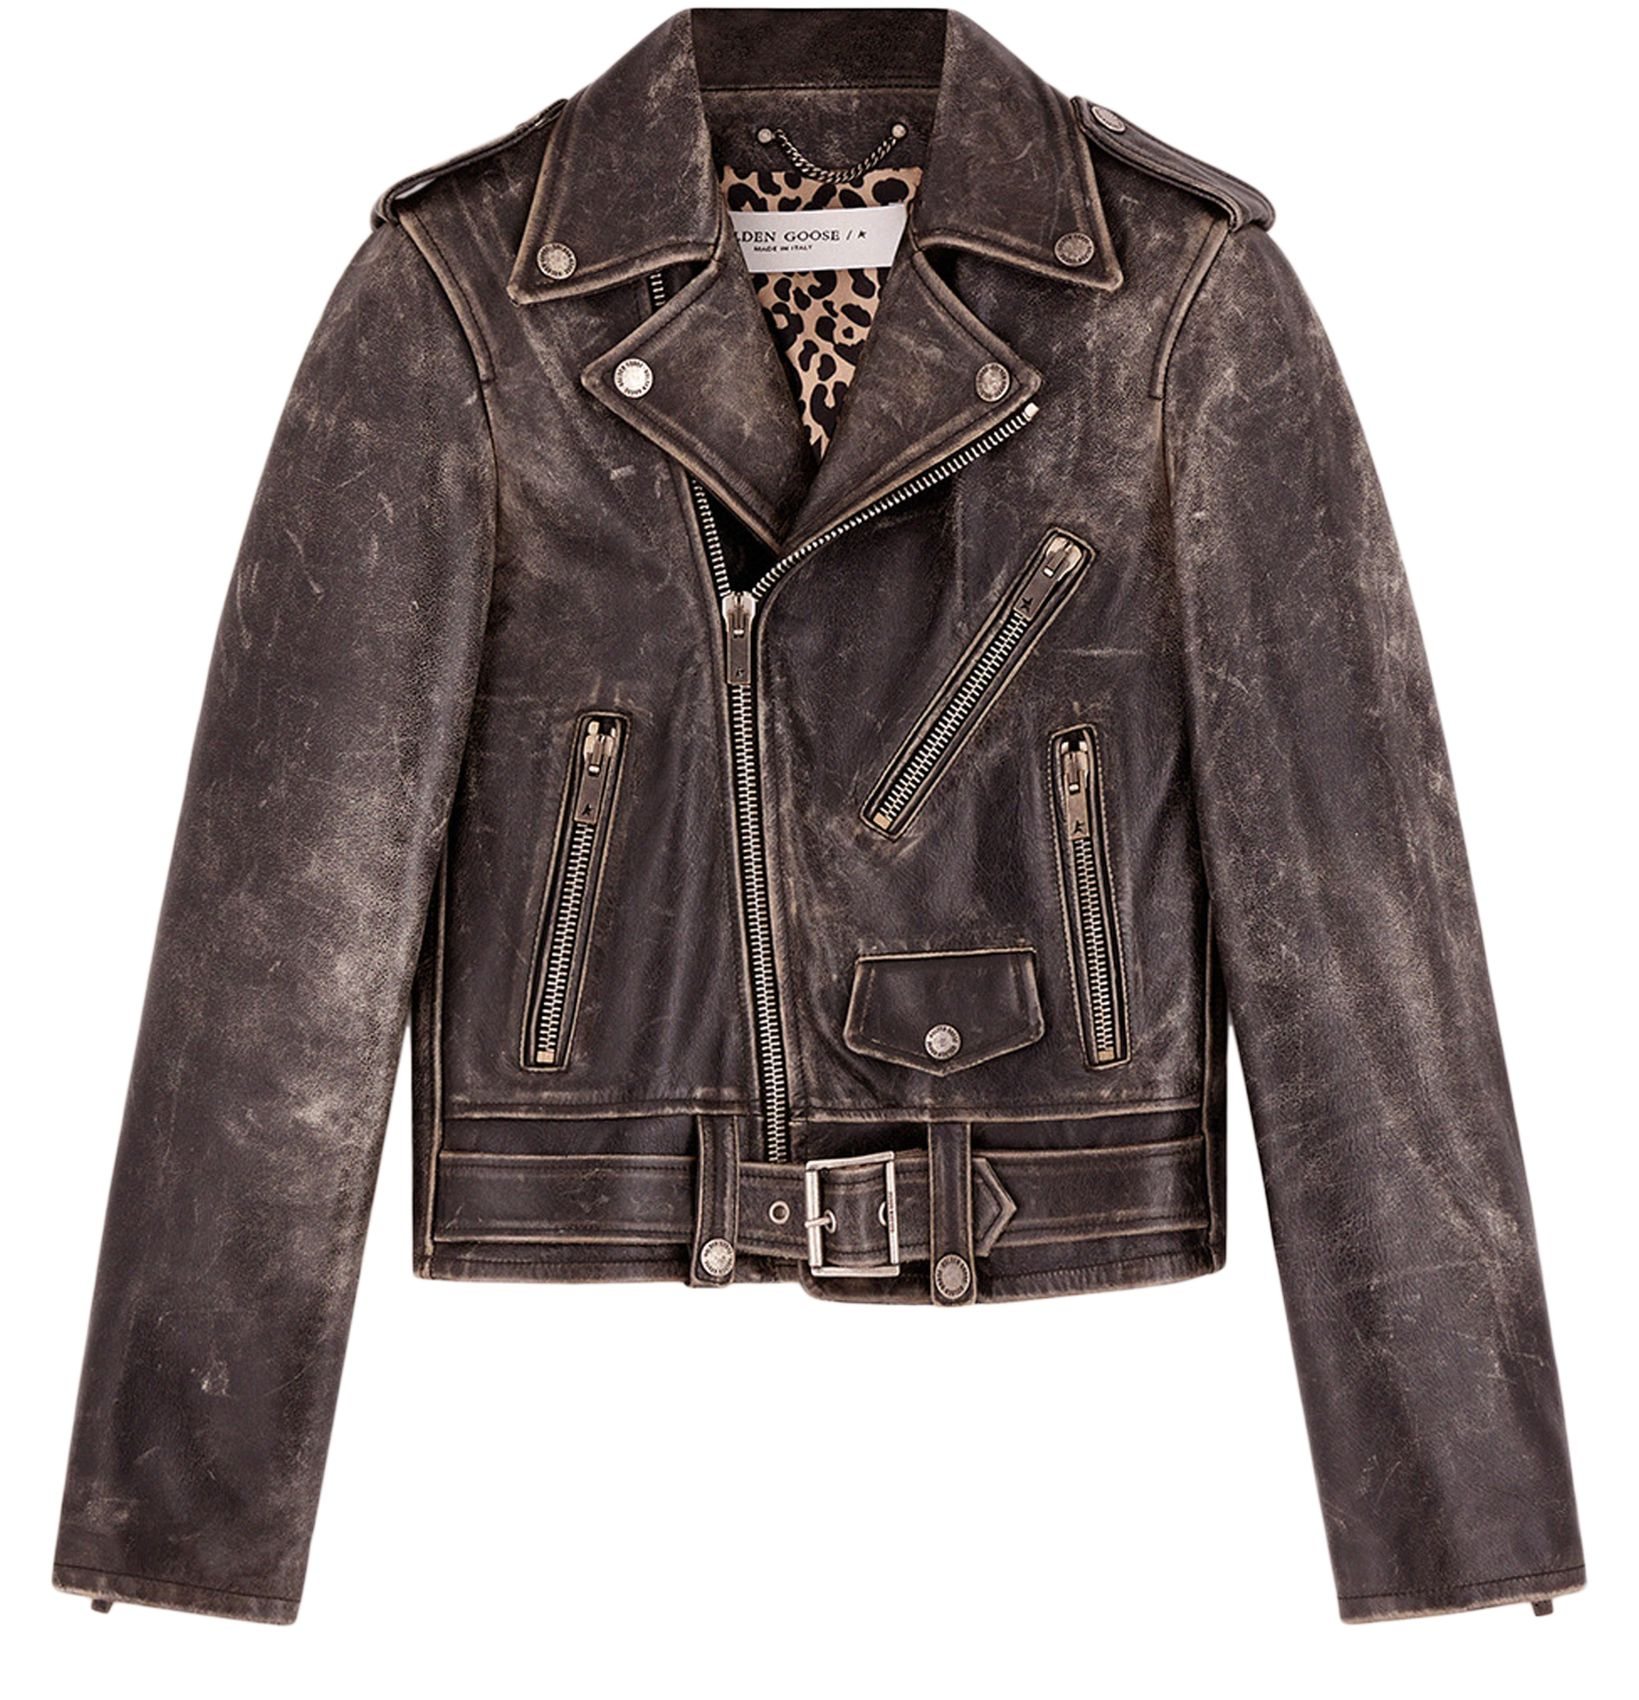 A leather jacket with a leopard print lining Description automatically generated